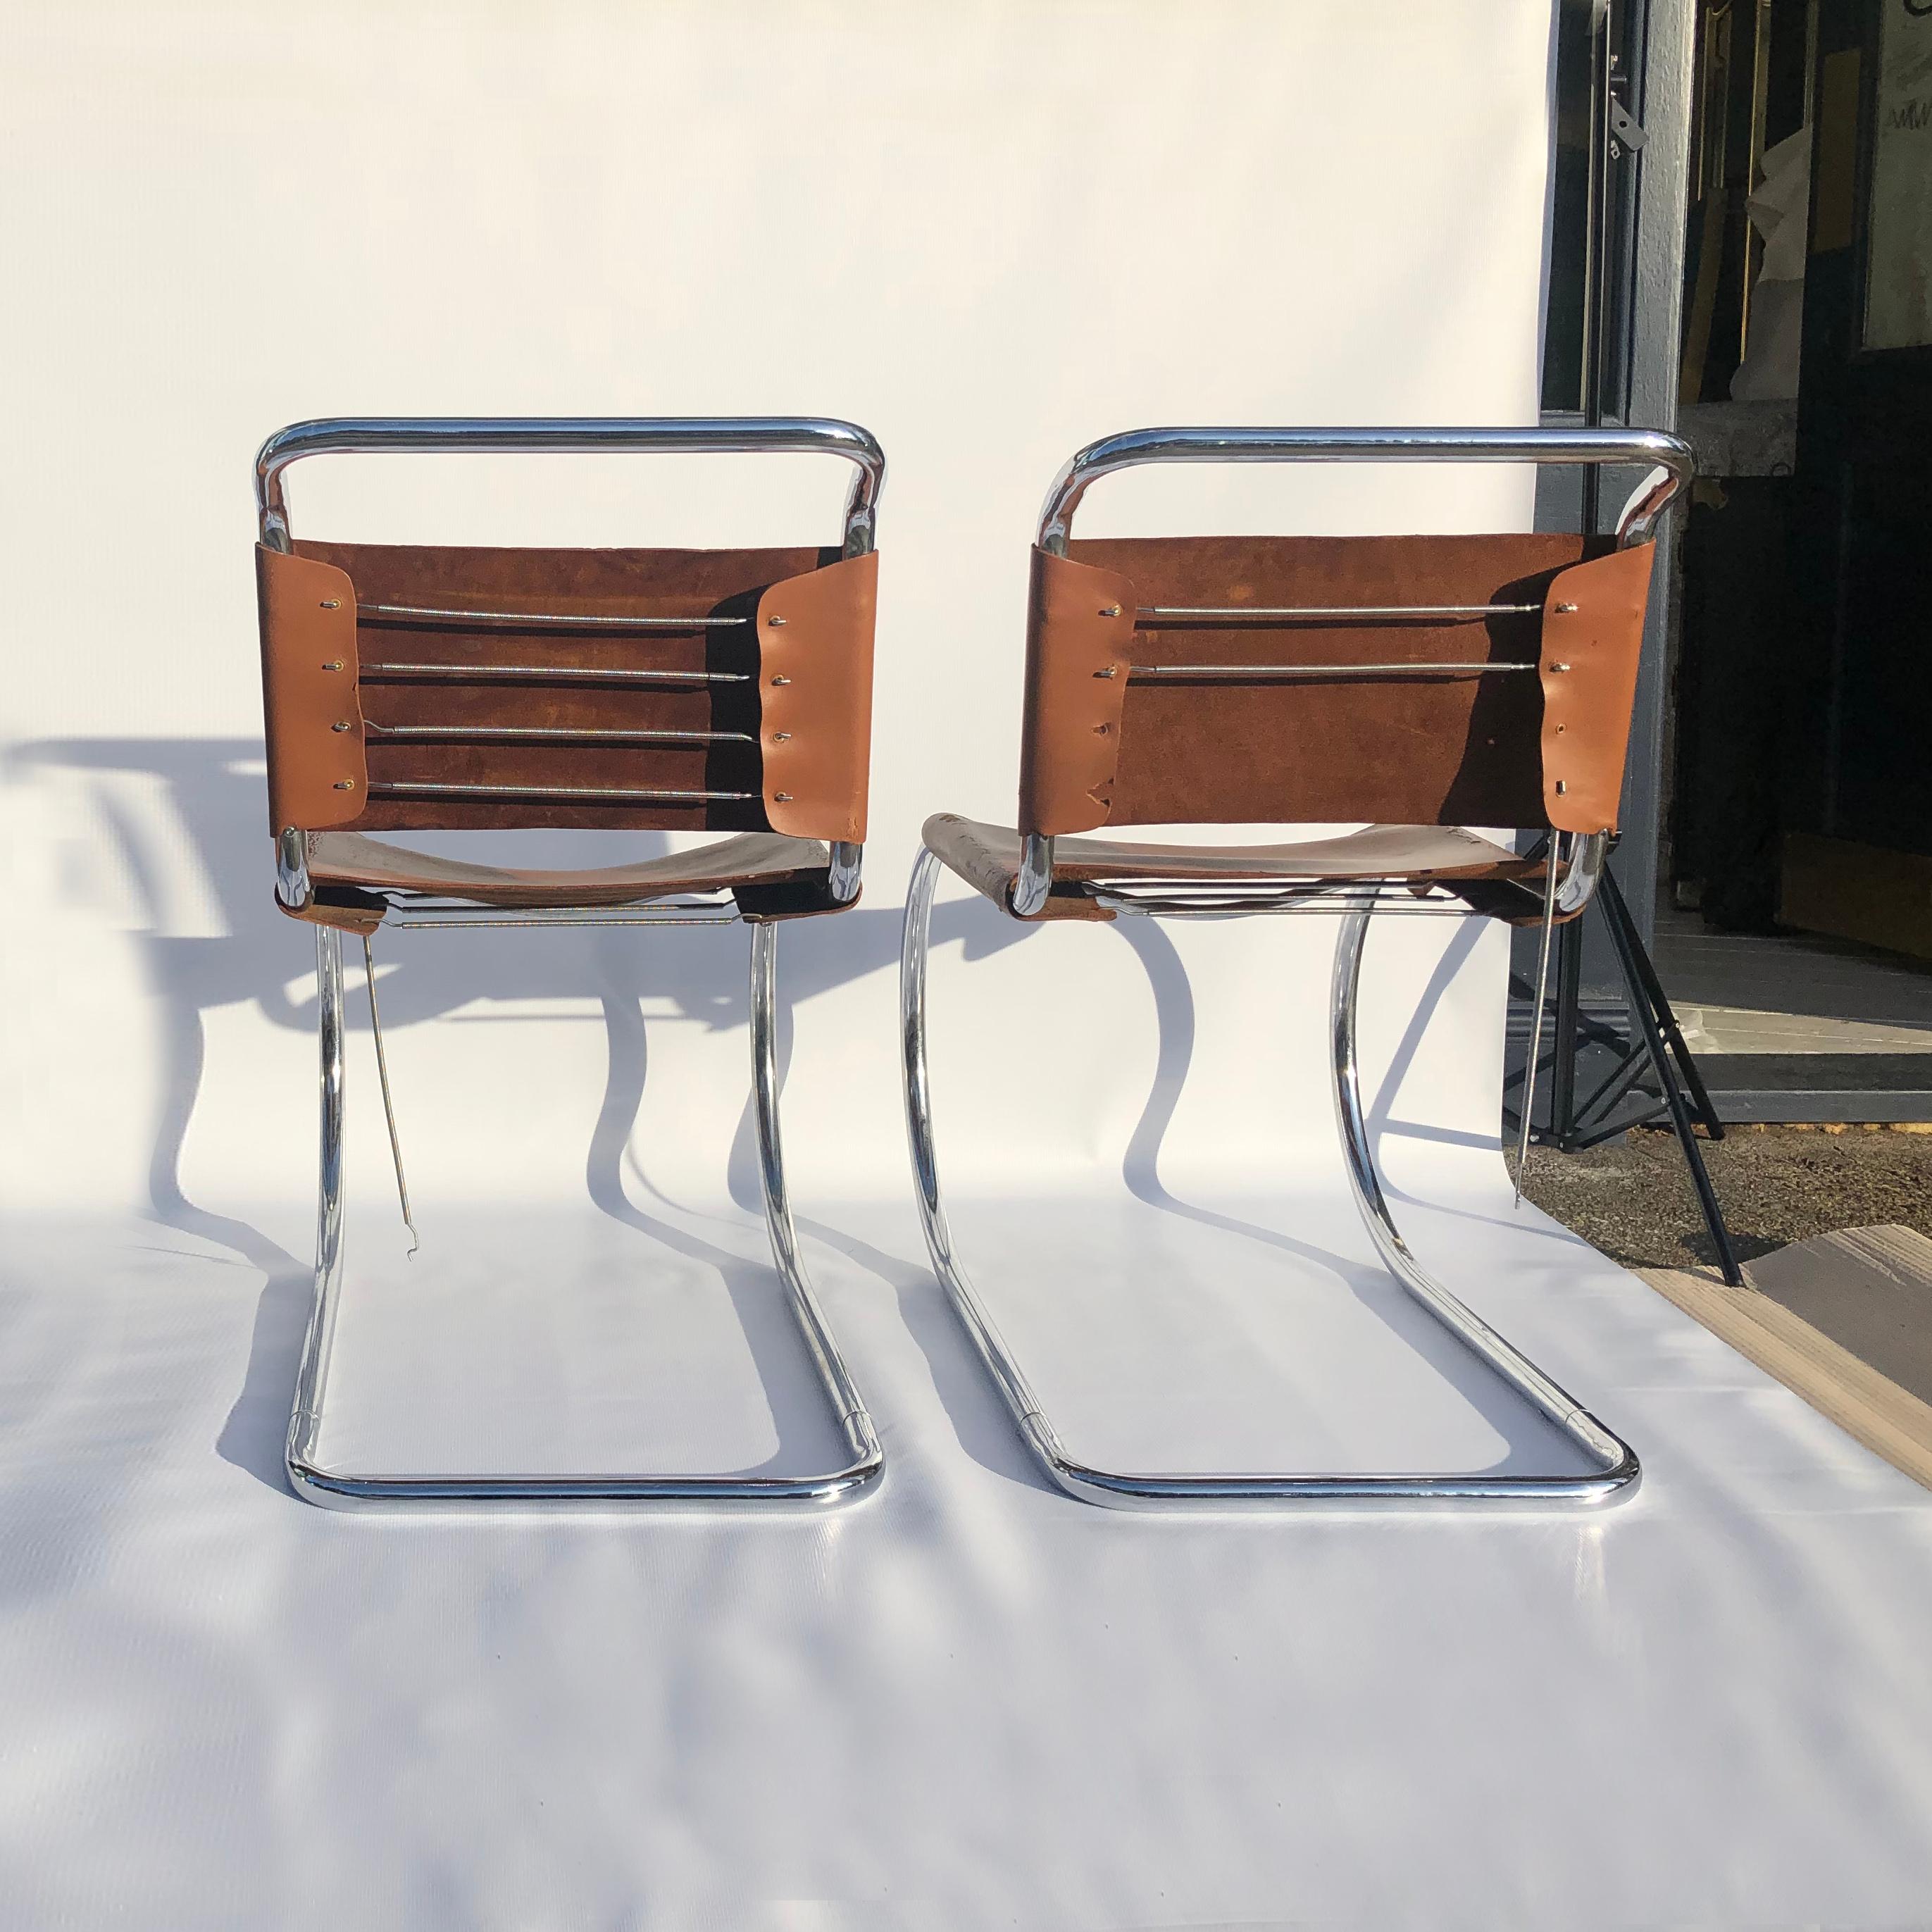 Steel 4 Ludwig Mies van der Rohe Mr10 Dining Chairs 1960s Knoll International  For Sale